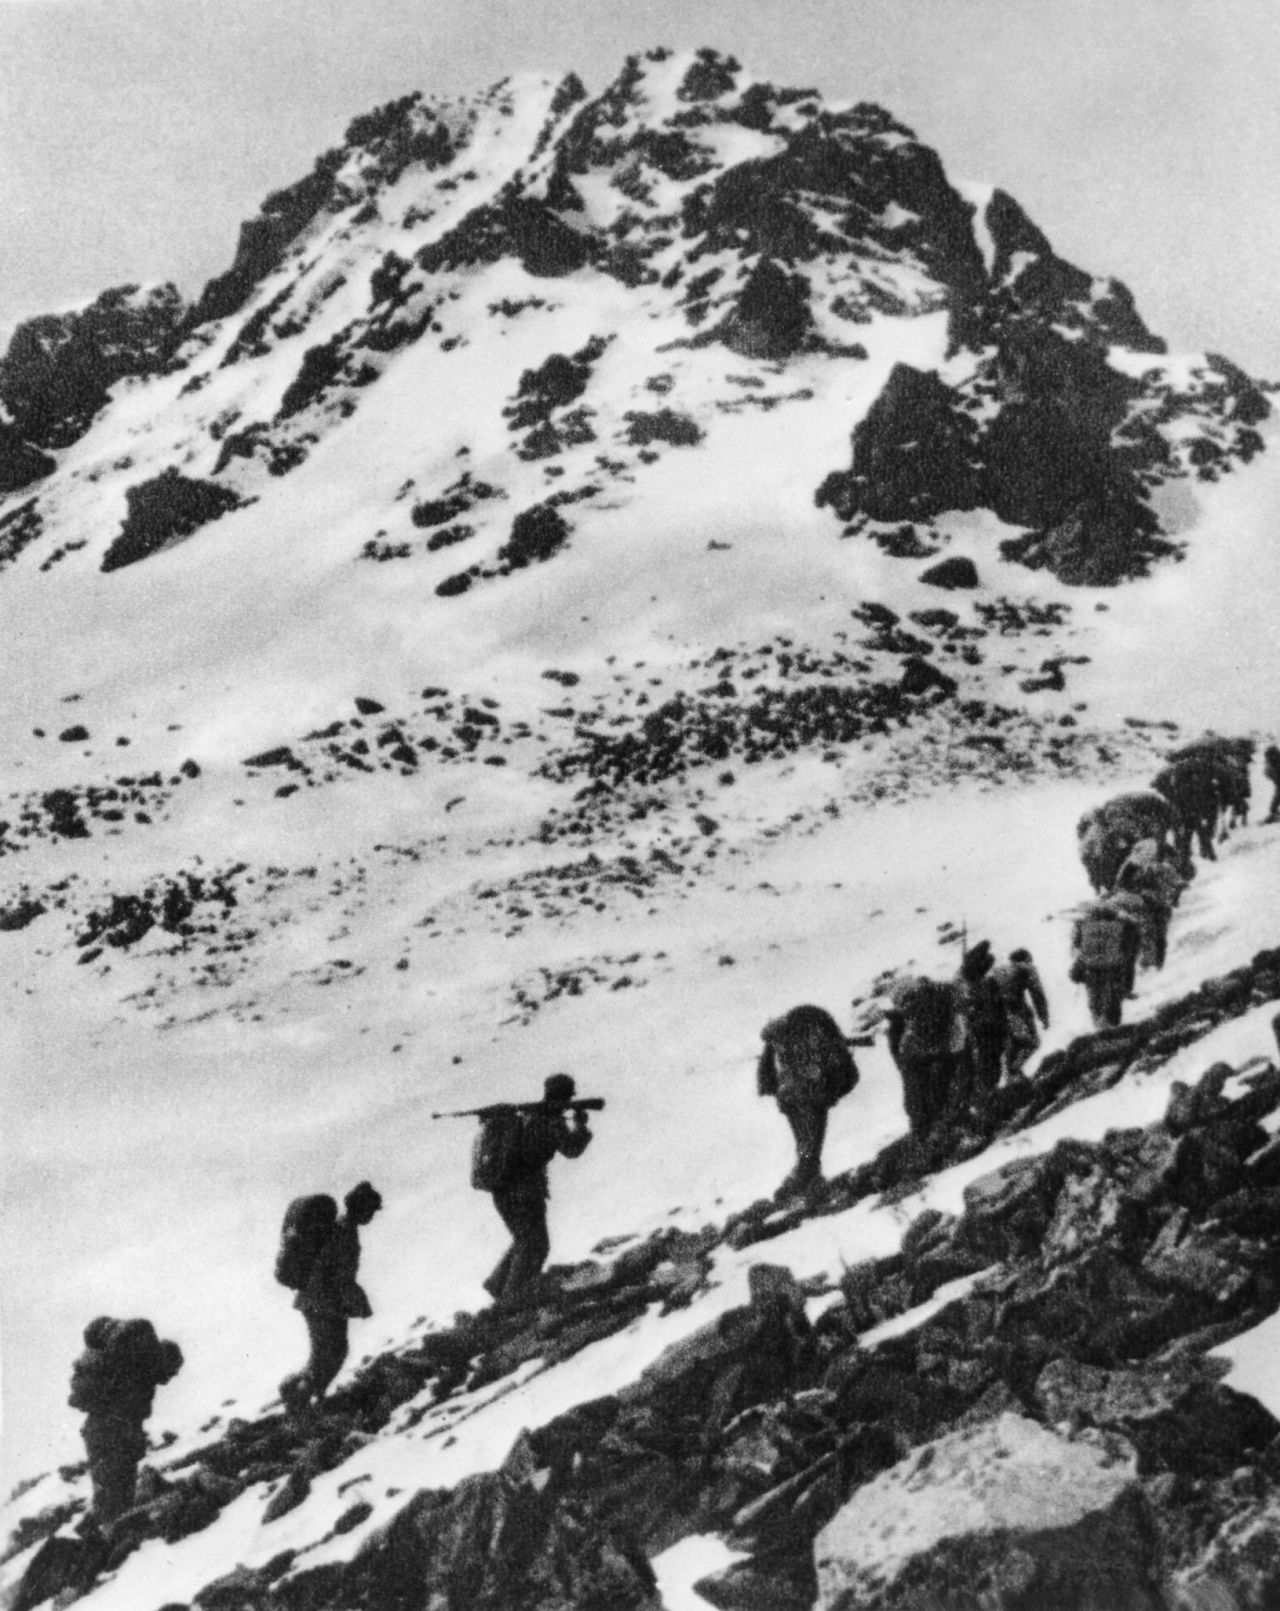 The Red Army, the Communist party force battling the Nationalists, climbs the snow-capped mountain of Jiajinshan in China's Sichuan province during the Long March in June 1935. The Long March was a yearlong journey taken by the communists to evade the Nationalist forces that had encircled them in southwest China. It spanned thousands of miles and ended in Yan'an.